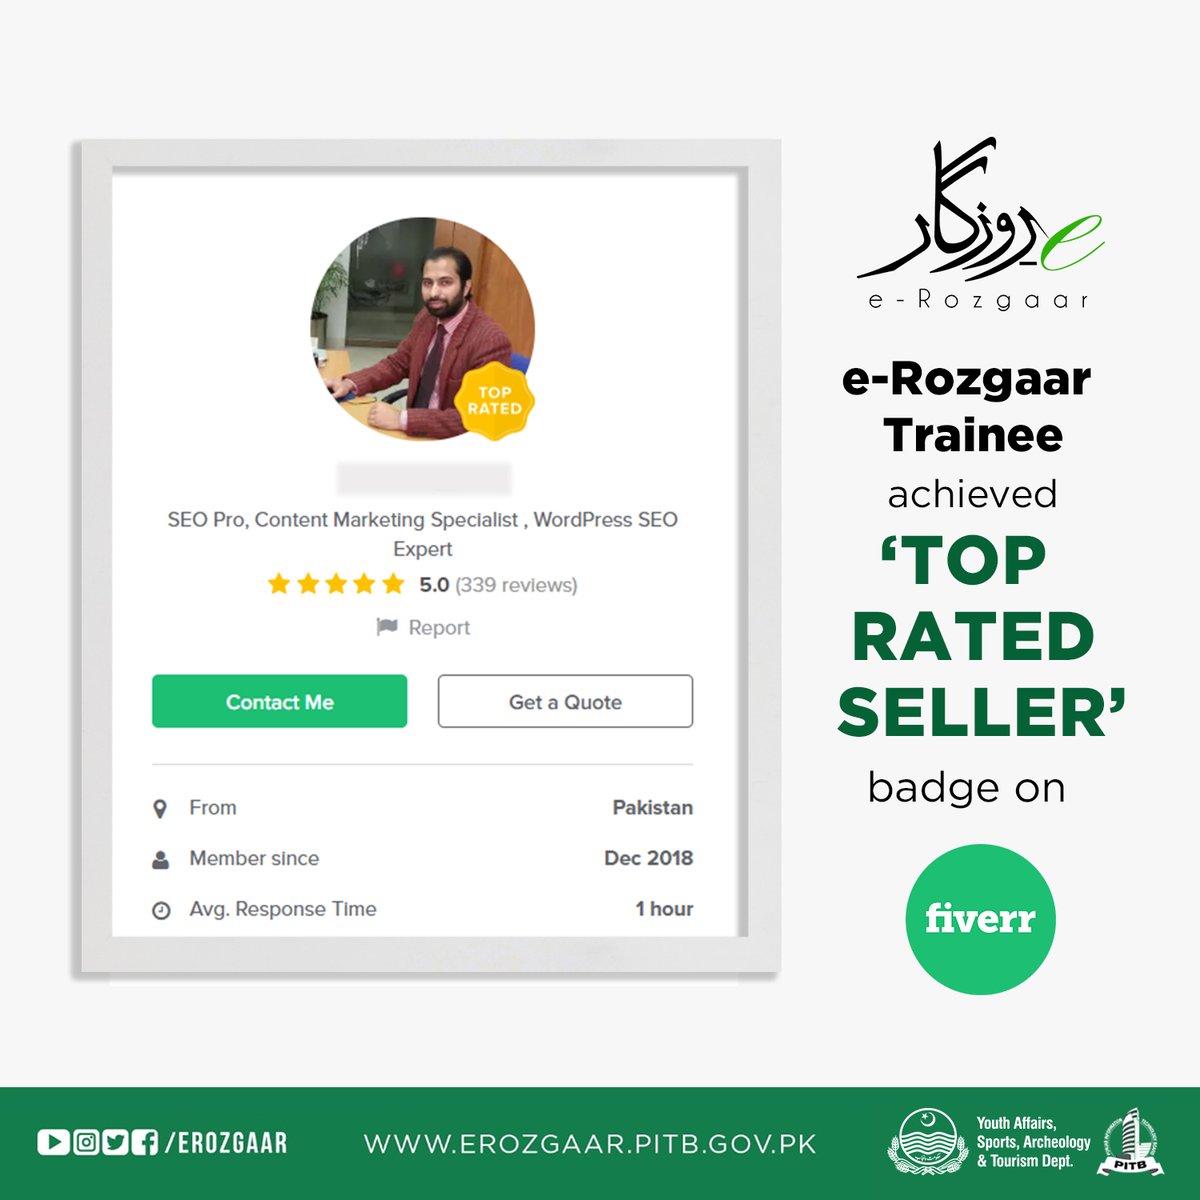 e-Rozgaar Program on X: “E-Rozgaar student earns Top Rated Seller Badge”  Team @erozgaar would like to congratulate a member of its esteemed alumni  Nauman Ali on being awarded with the Top Rated